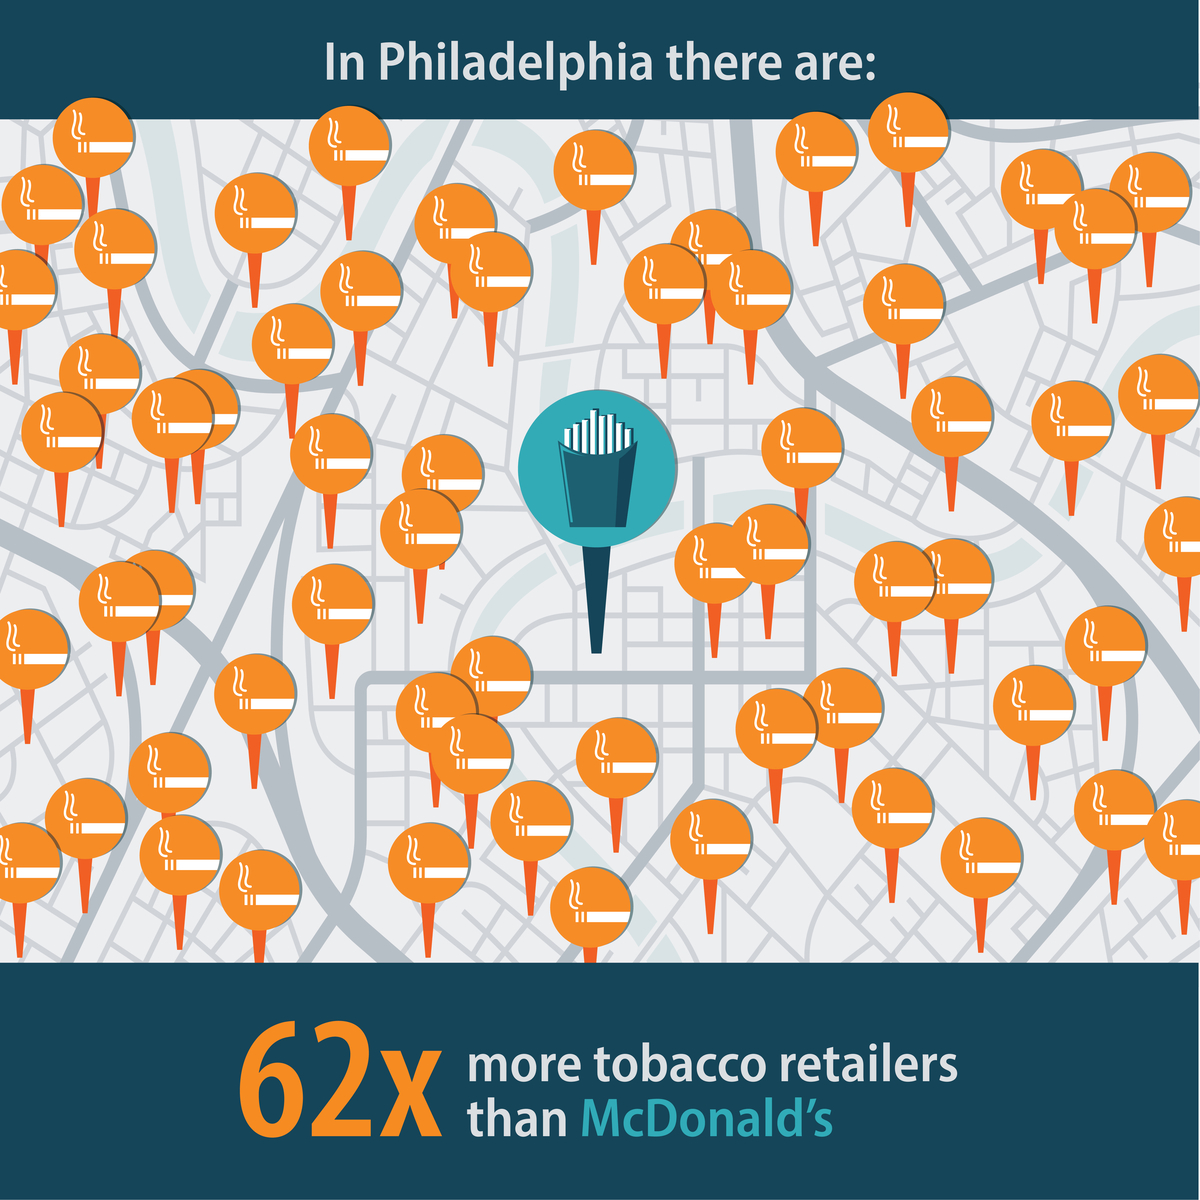 In Philadelphia there are: 62 times more tobacco retailers than McDonald's